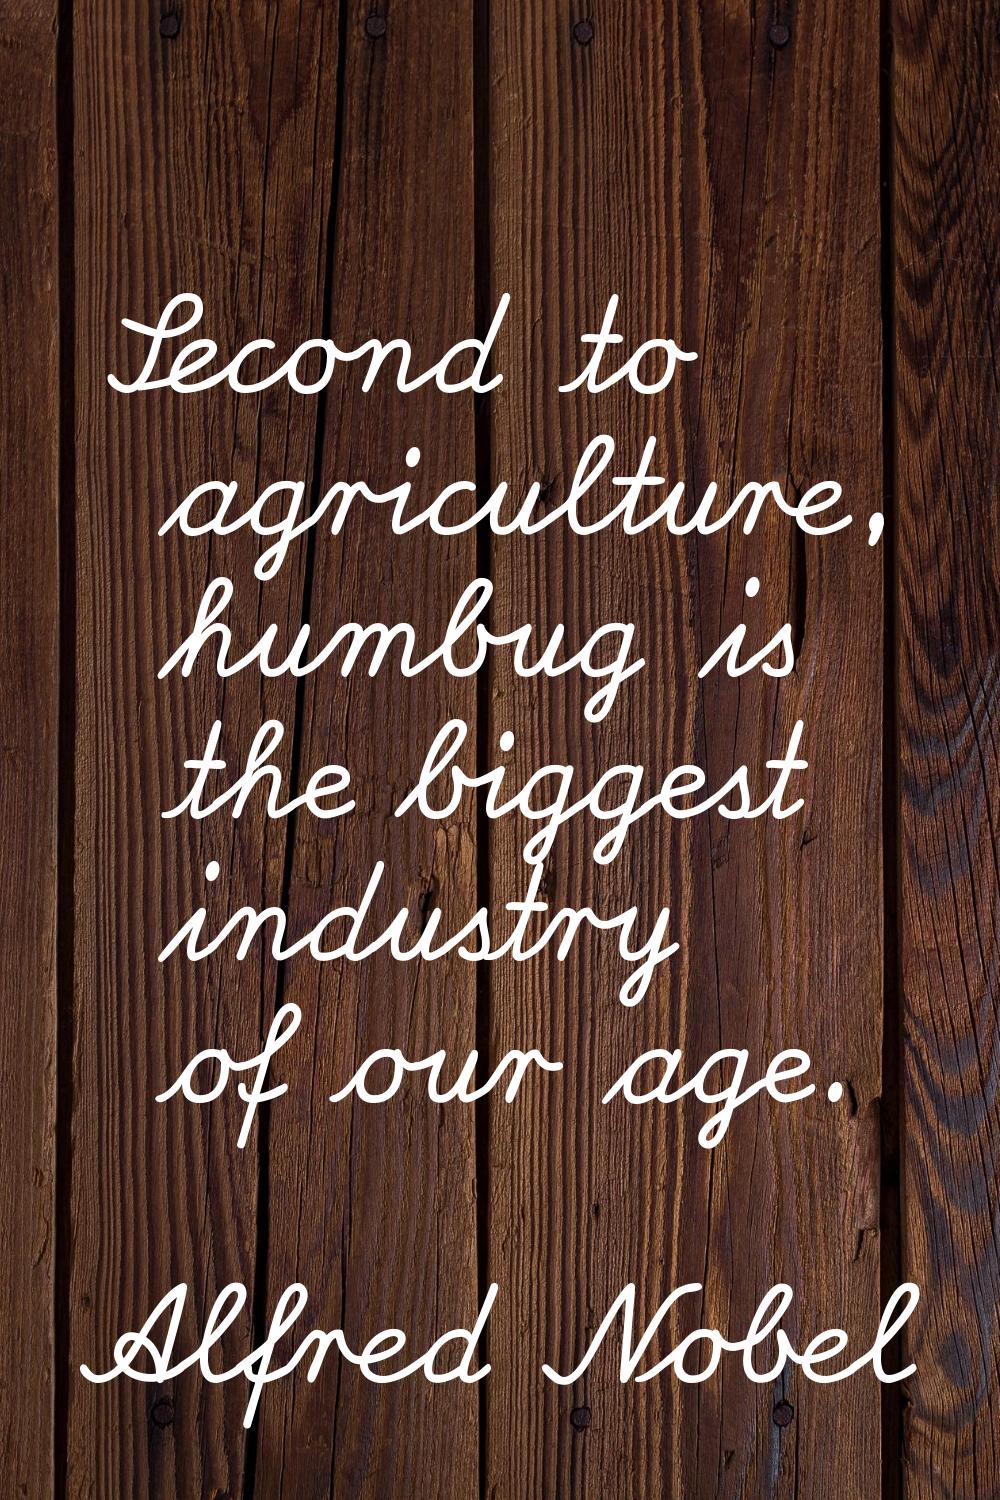 Second to agriculture, humbug is the biggest industry of our age.